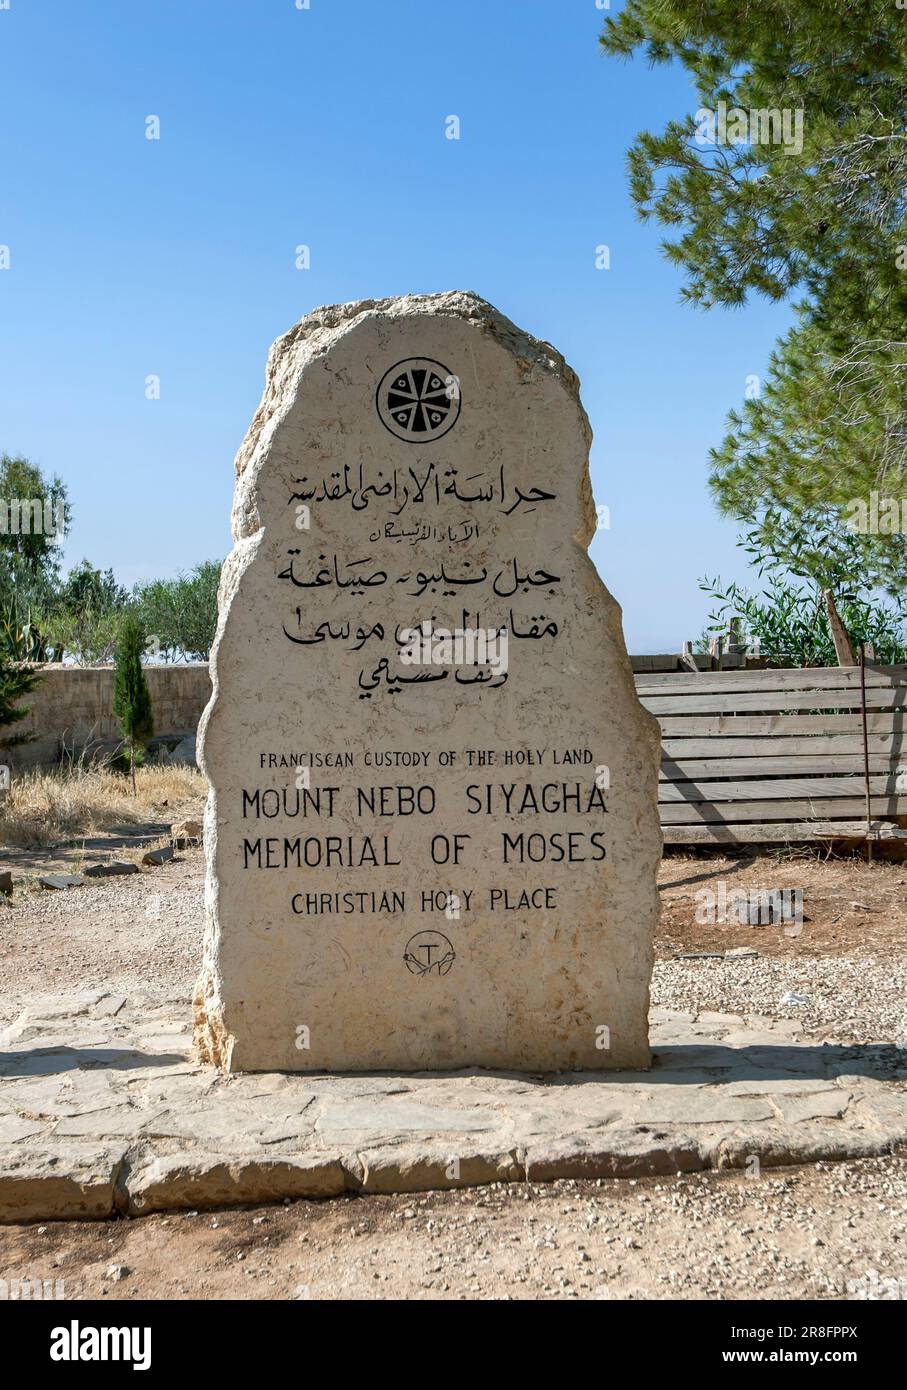 A memorial stone dedicated to the Biblical figure Moses, who is believed to have died and been buried at Mt Nebo in Jordan. Stock Photo